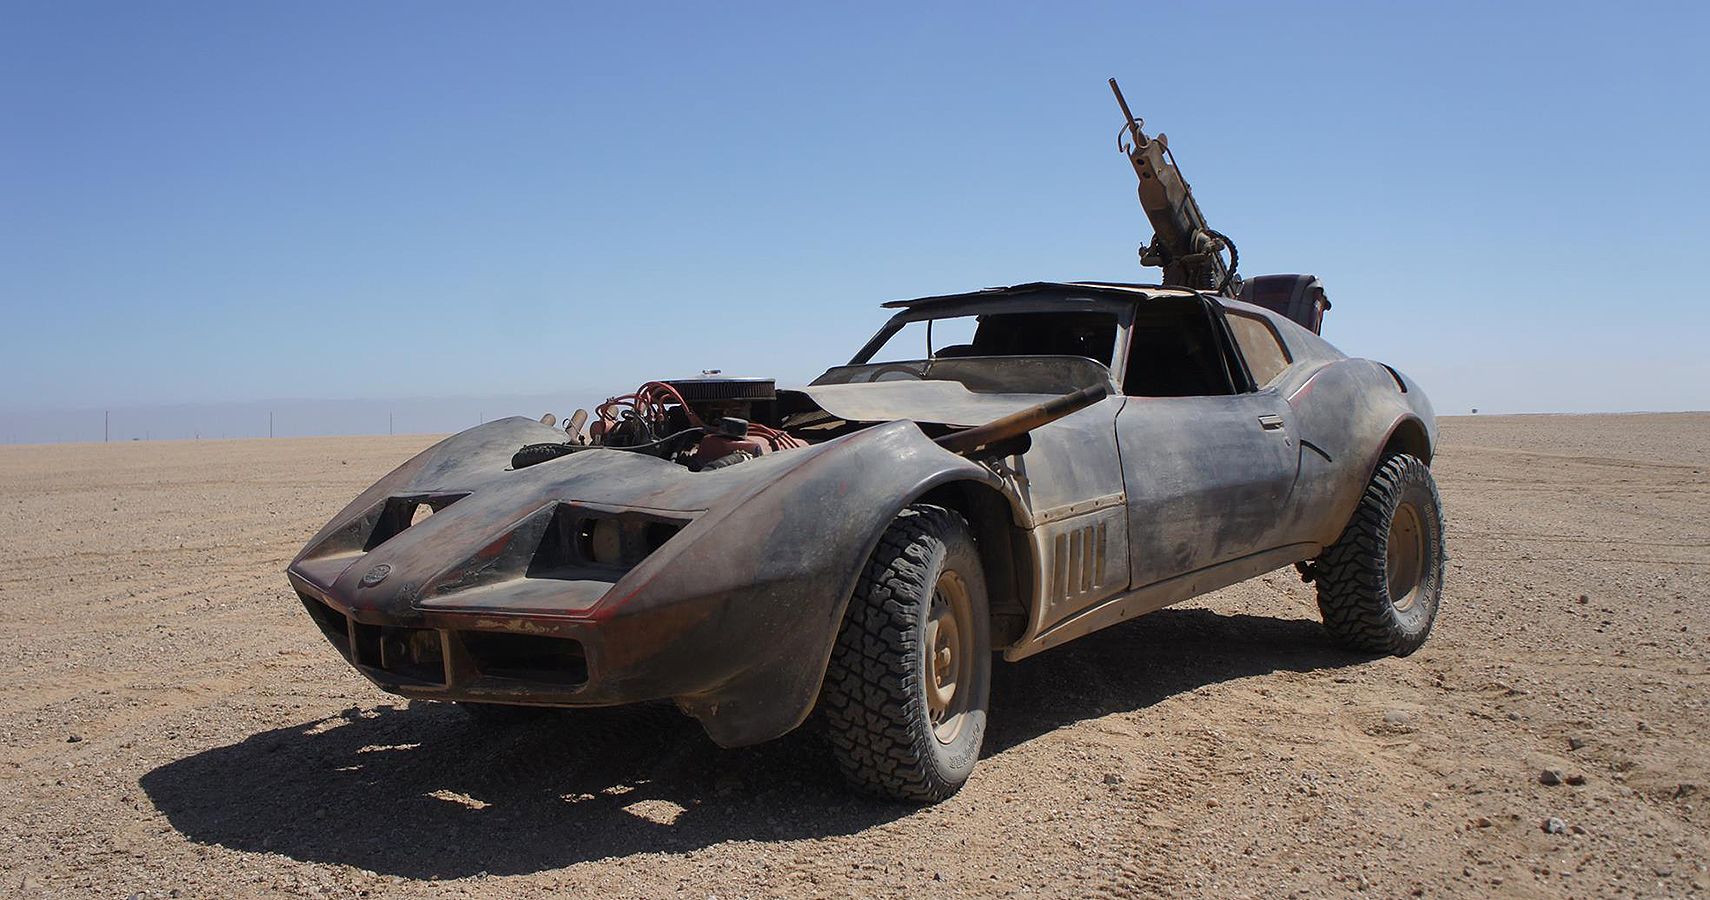 The Vette-Like Ride Of The War Boys